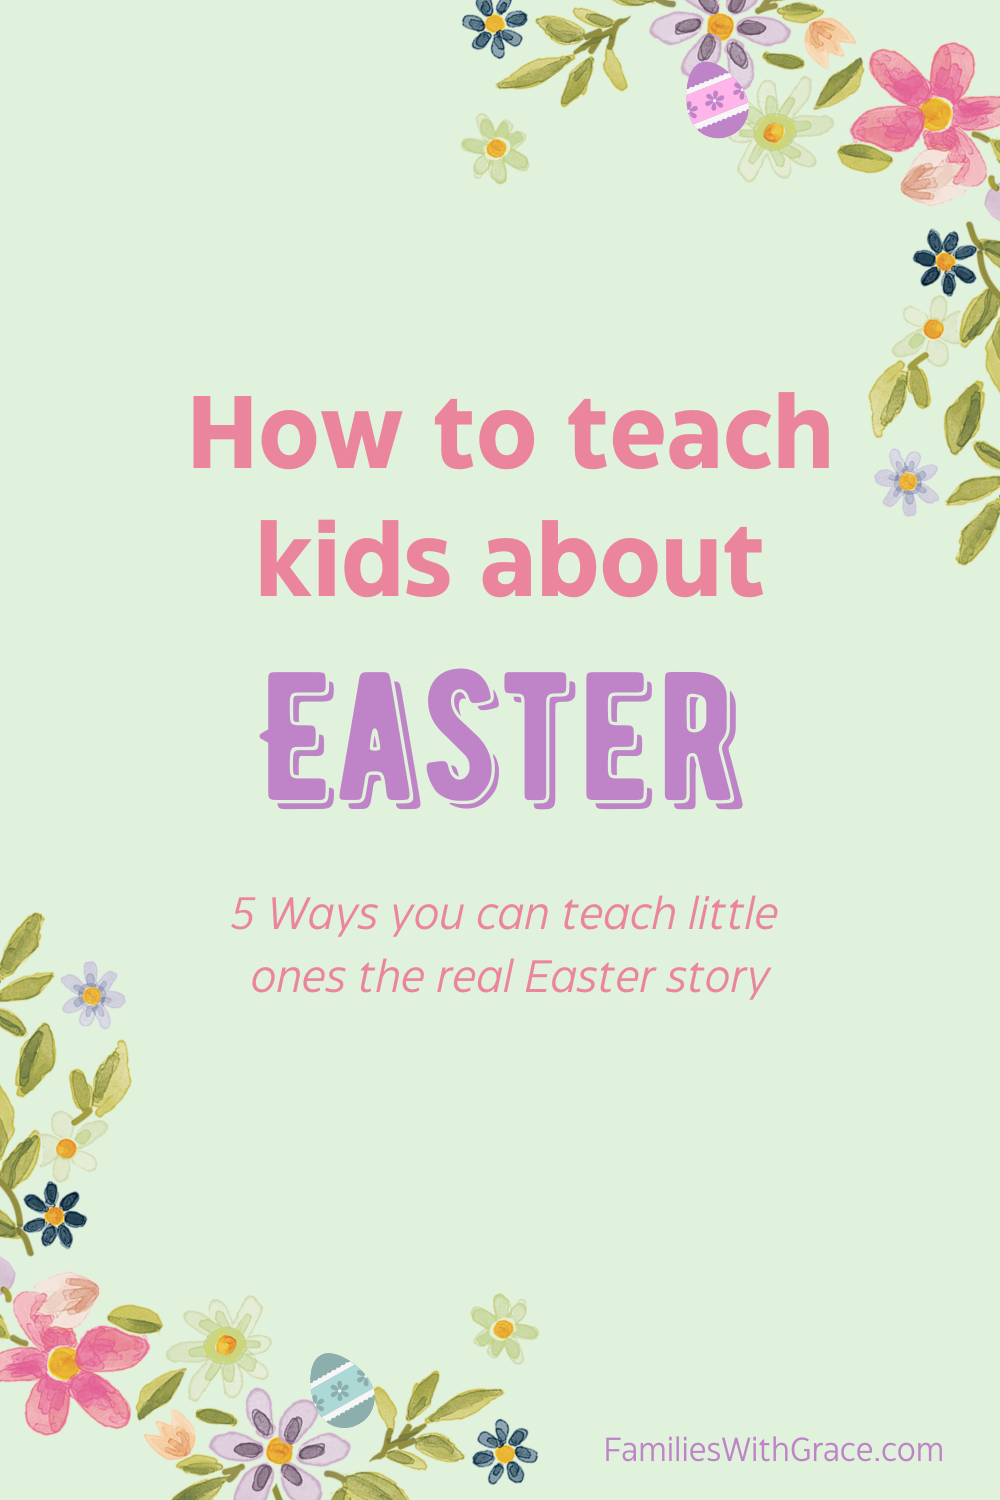 Ideas to teach kids about Easter